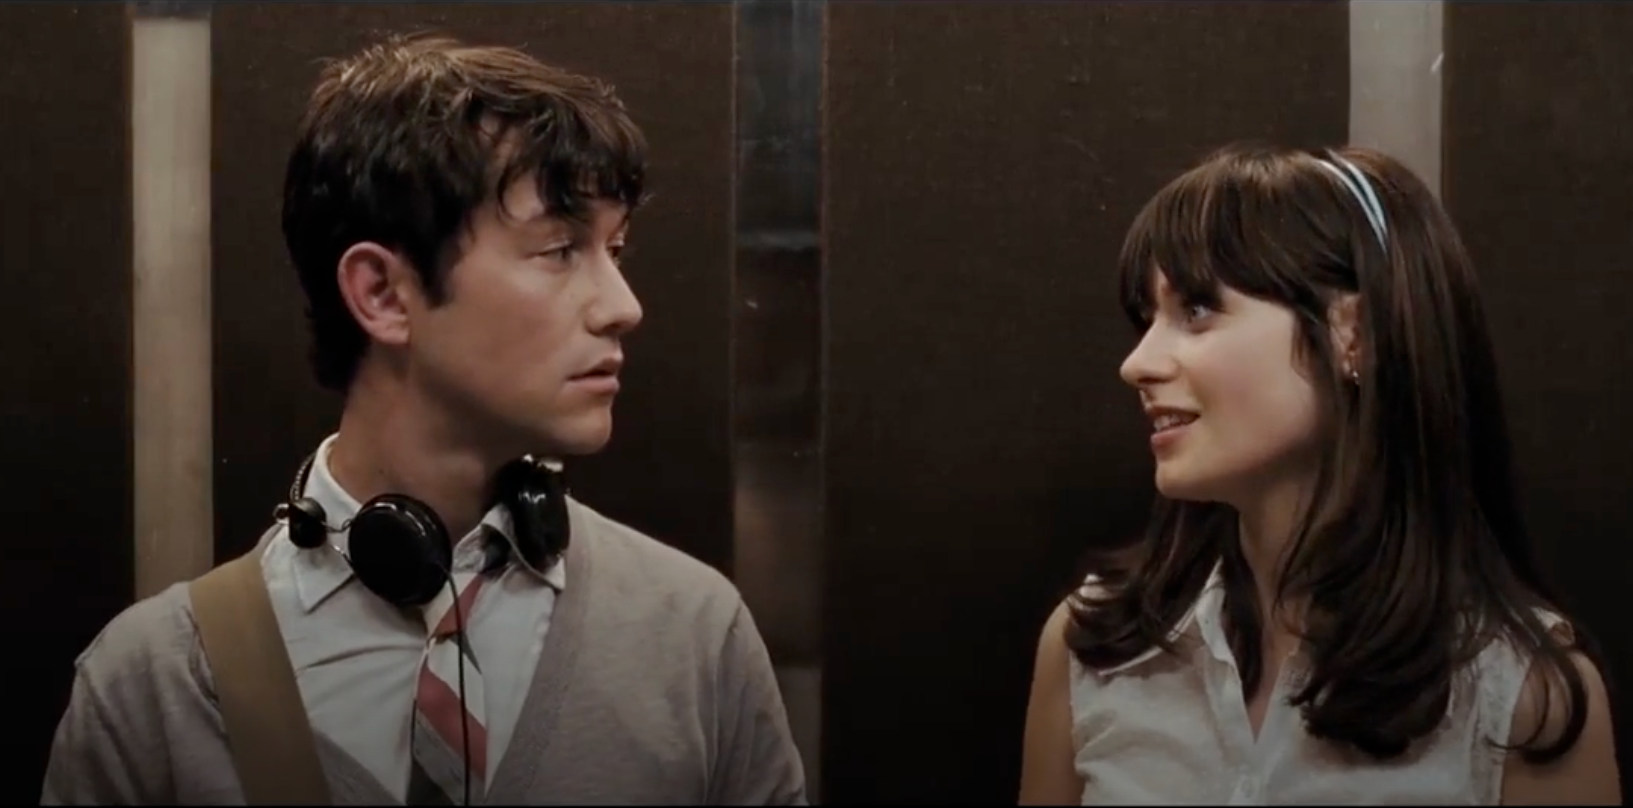 (500) Days of Summer has generated a cult and warring fan base